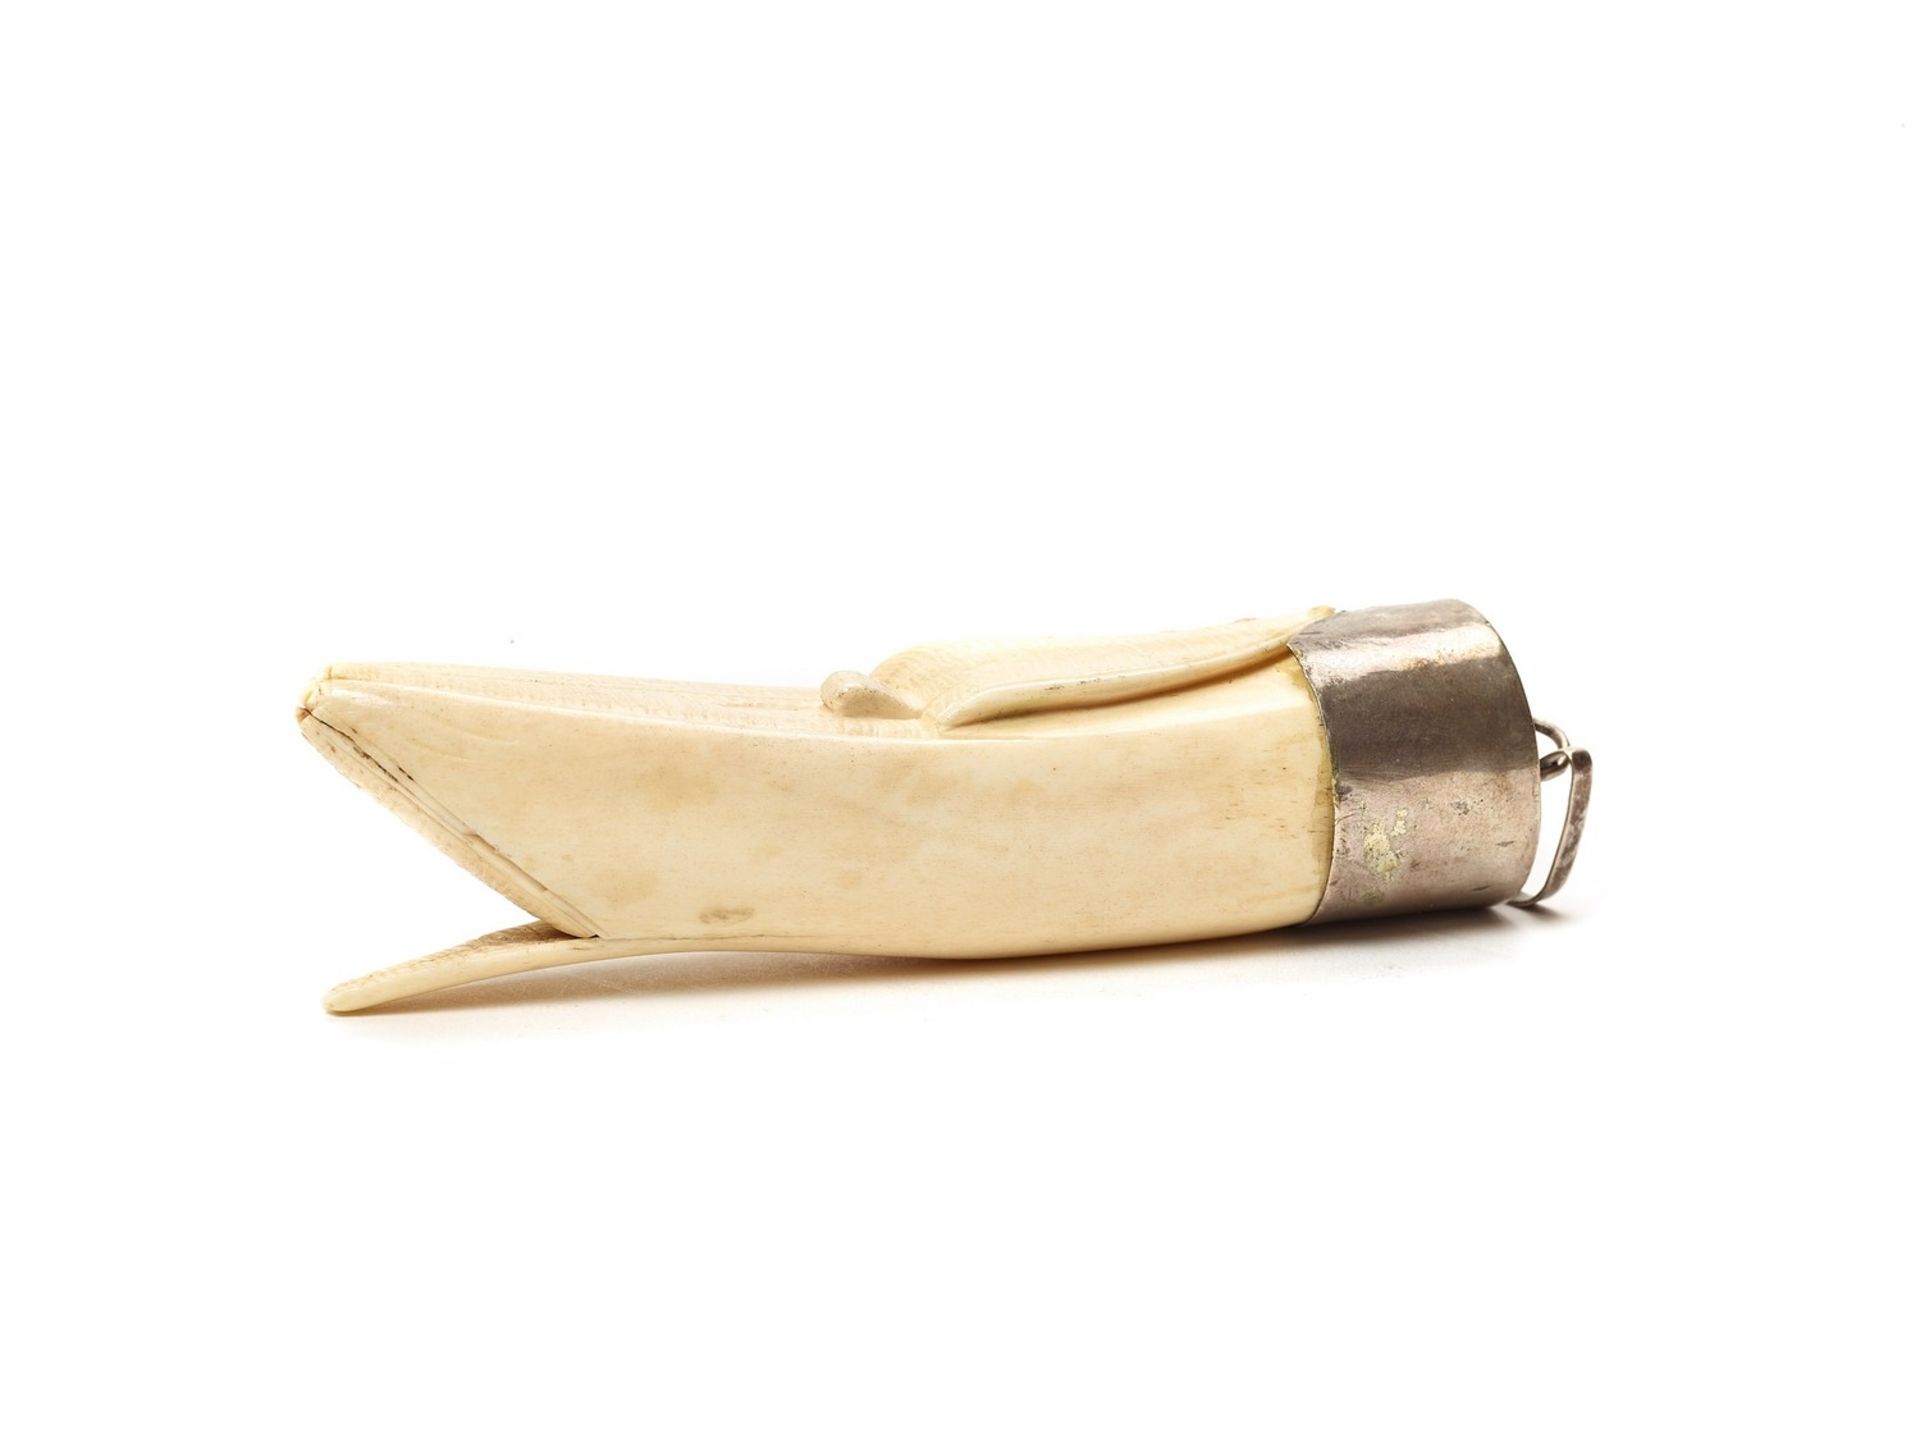 AN IVORY OKIMONO OF A PEELING BANANA WITH SILVER MOUNT - Image 2 of 4